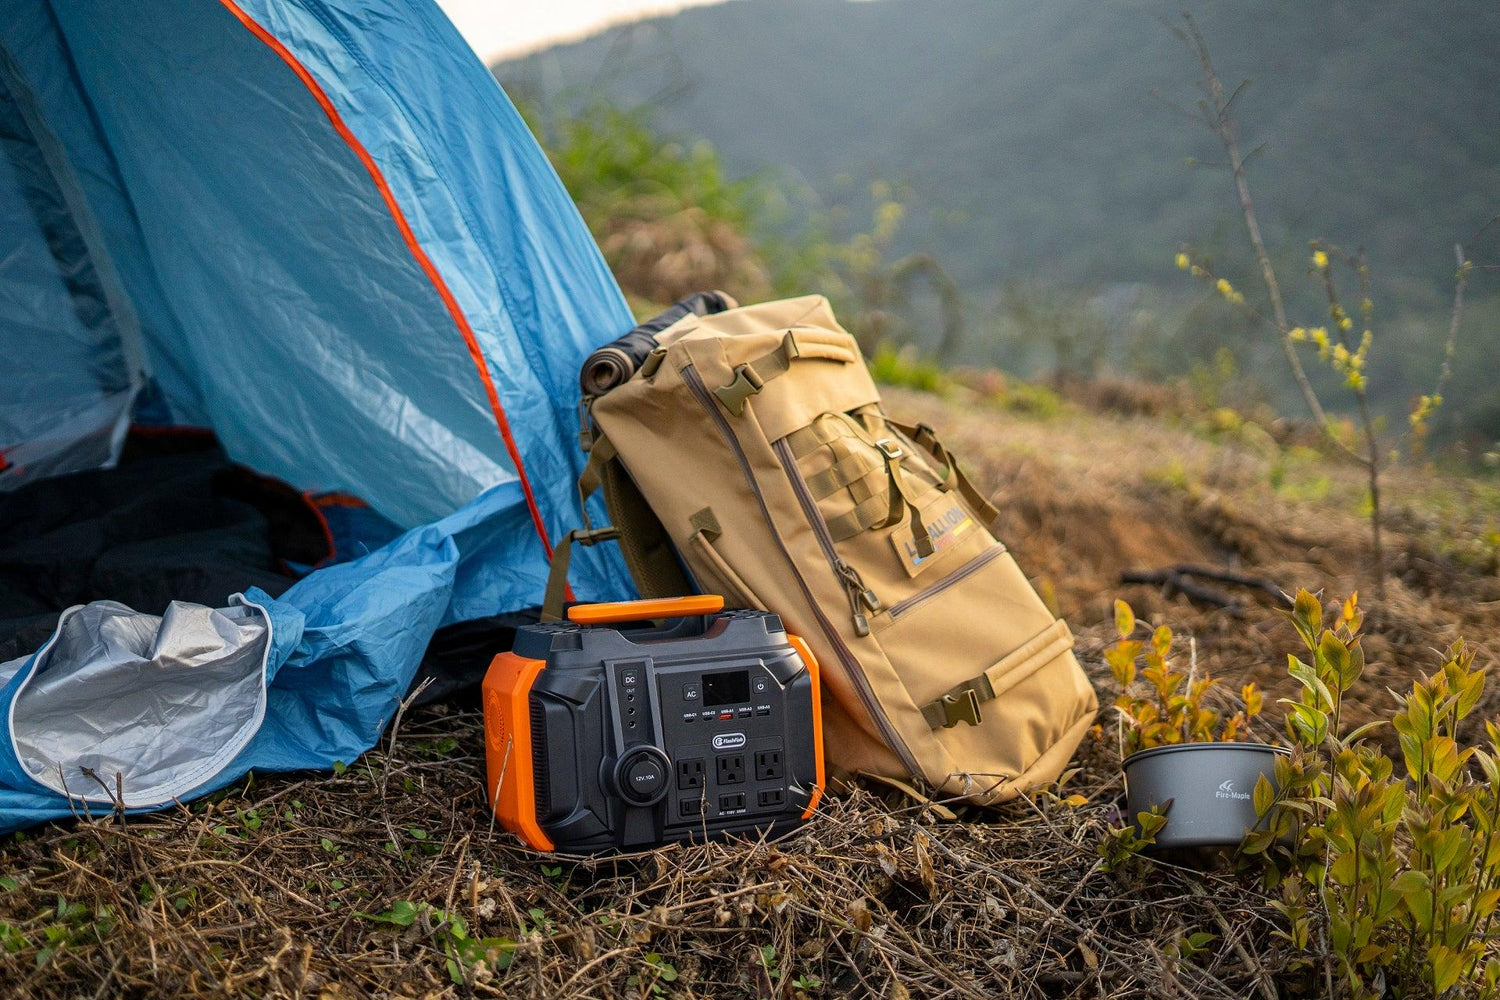 How to Choose an Outdoor Power Supply Suitable for Spring Camping? - Flashfish Solar Generator